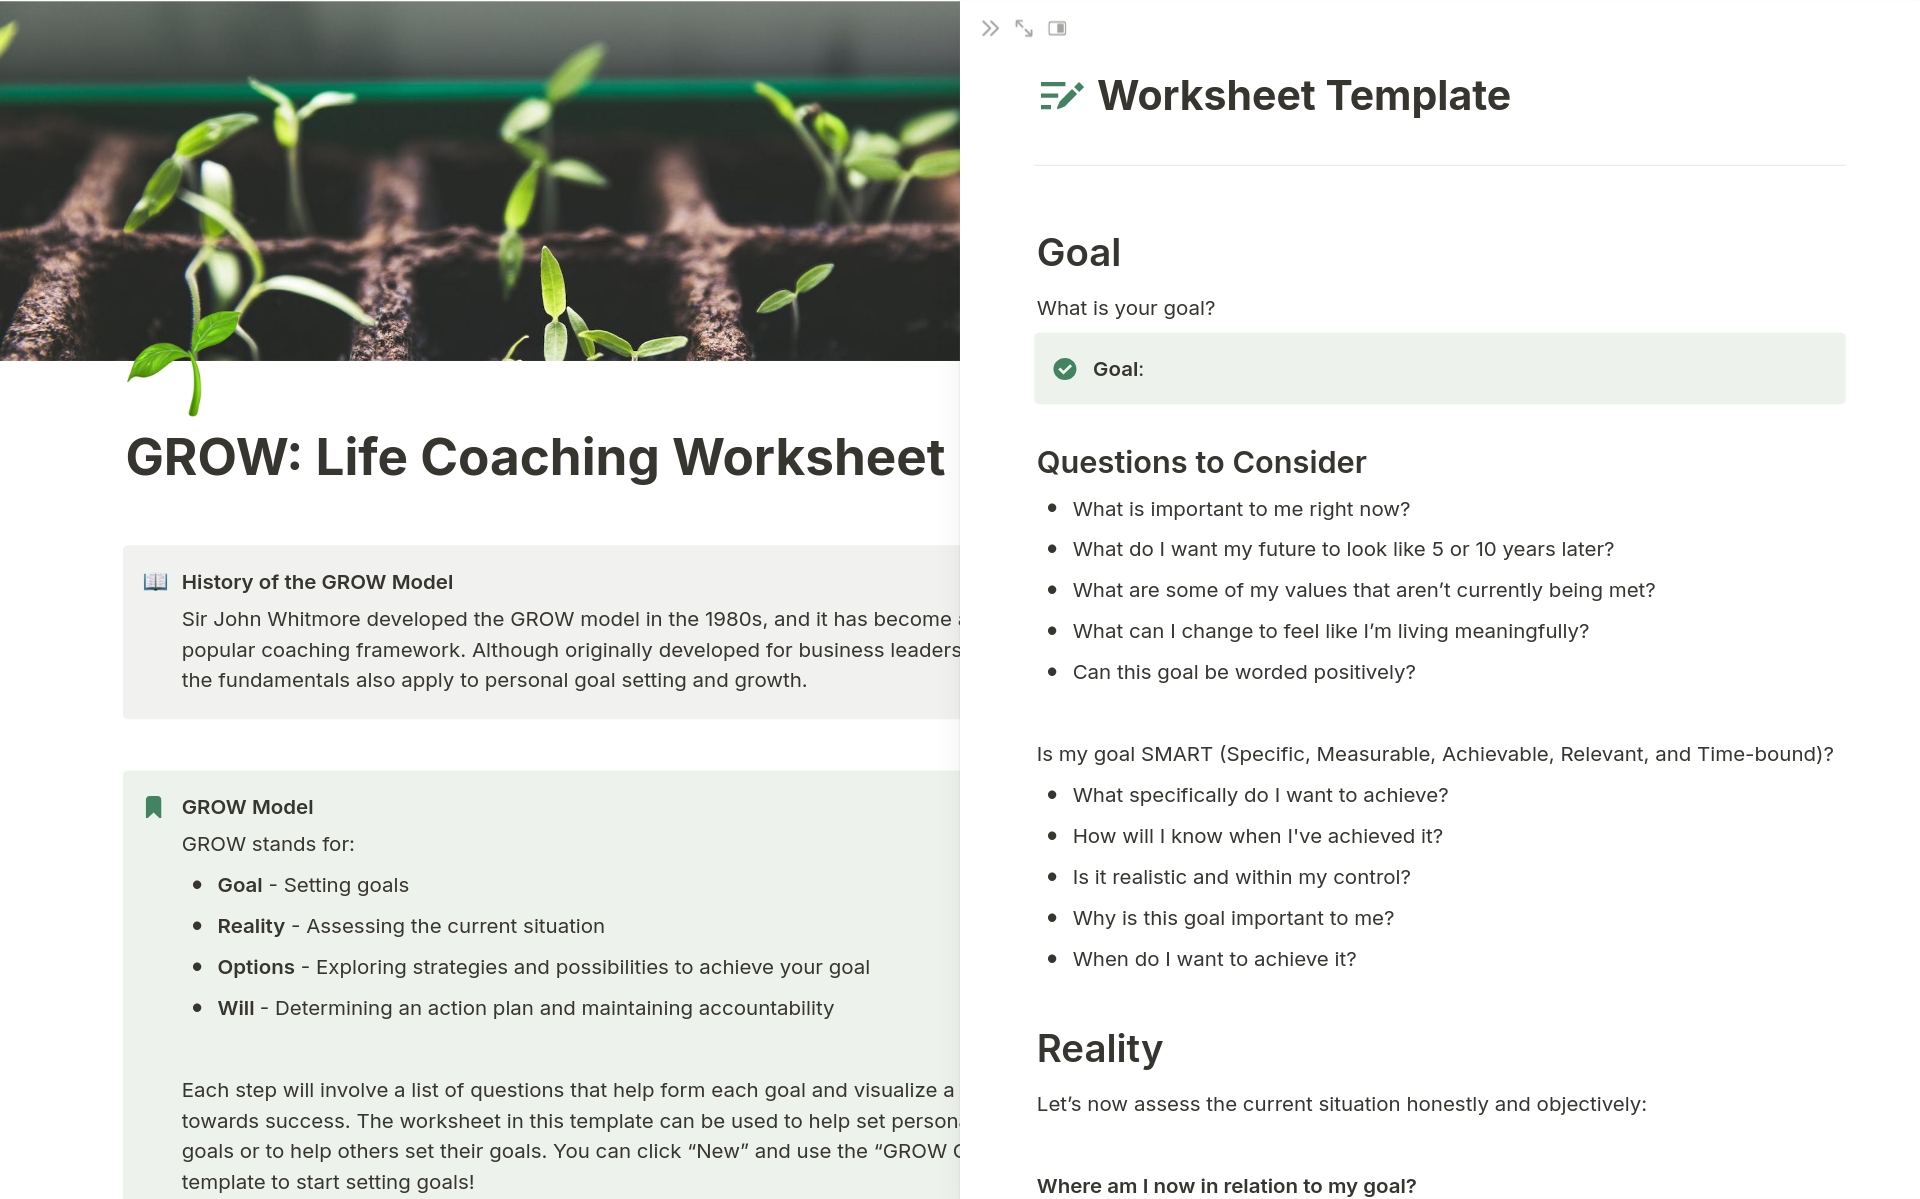 Set personal goals or help clients set their goals using a worksheet based on the GROW method!